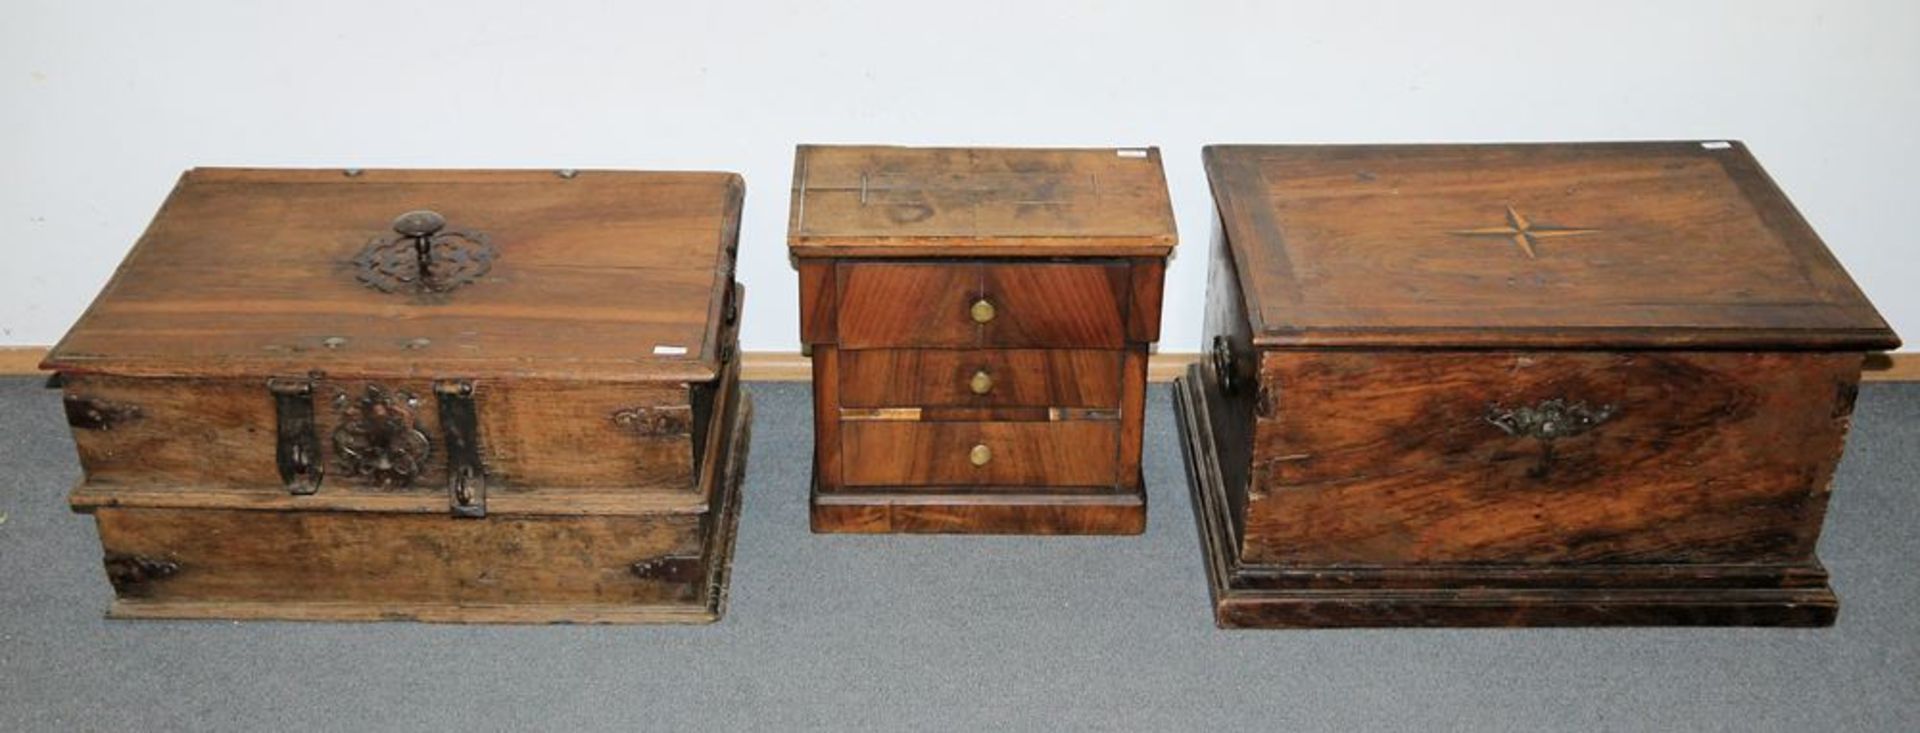 Model chest and two 19th century valuables chests